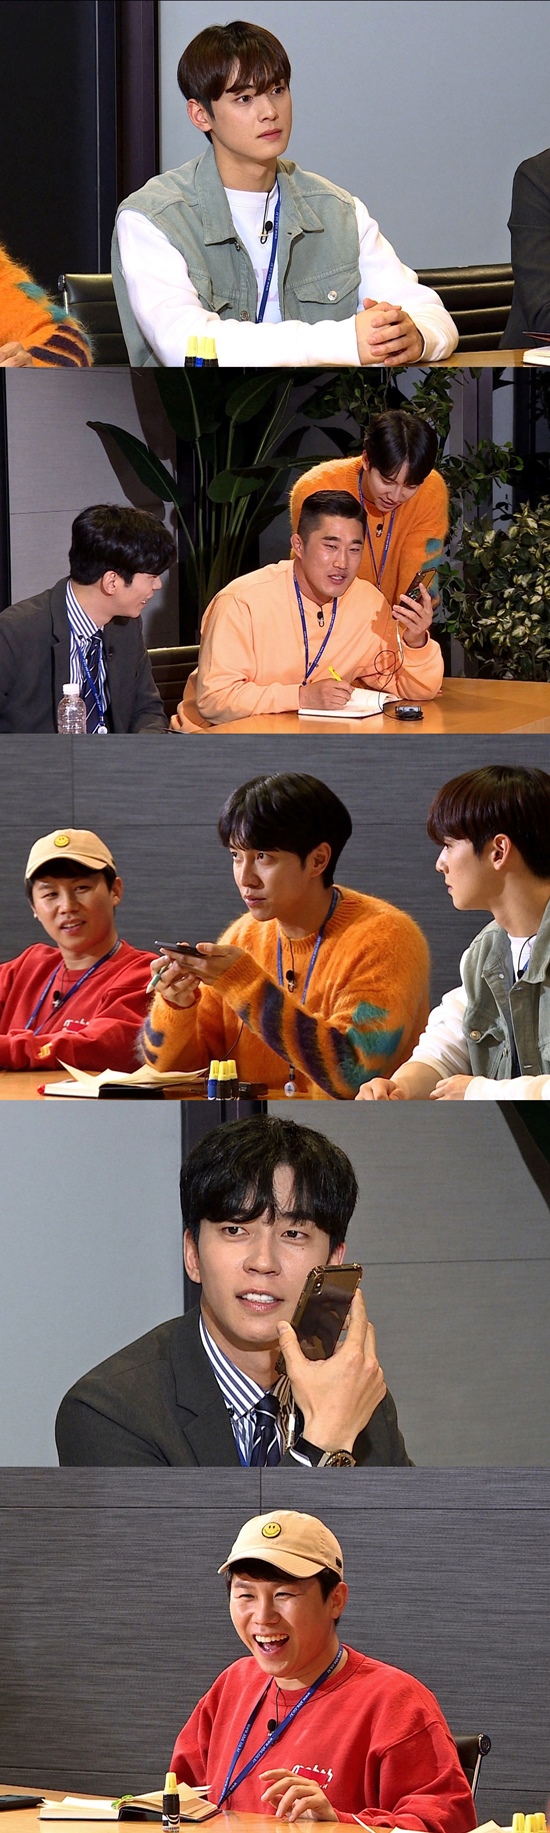 Members of All The Butlers went directly to the masters office.In the SBS entertainment program All The Butlers broadcasted on the 26th, Lee Seung-gi, Shin Sung-rok, Yang Se-hyeong, Cha Eun-woo and Kim Dong-Hyun are drawn to the masters office.Members who have challenged SBS new employees and have completed internships at the Cultural and Political Bureaus will finally conduct a final interview with the head of the entertainment department.The members fell into the Menbong after hearing the last mission of Sambu.However, for a while, the members soon mobilized their own connections and started to work.They are attracted by the fact that they have turned their calls to the enormous people who are excited even if they hear names such as Han Ji-min, Ma Dong-Seok, Yoo Hee-yeol and Baek Jong-won.Cha Eun-woo and Kim Dong-Hyun made the entertainment director admire the audience with a ruthless and irresponsible repatriation.Cha Eun-woo surprised the other side as well as the production team with his persistent persuasive persuasion, and Ma Dong-Seok said, Is it hard to get out?Its the back door that made me laugh.The members twists and turns can be found at All The Butlers broadcasted at 6:25 pm on the same day.